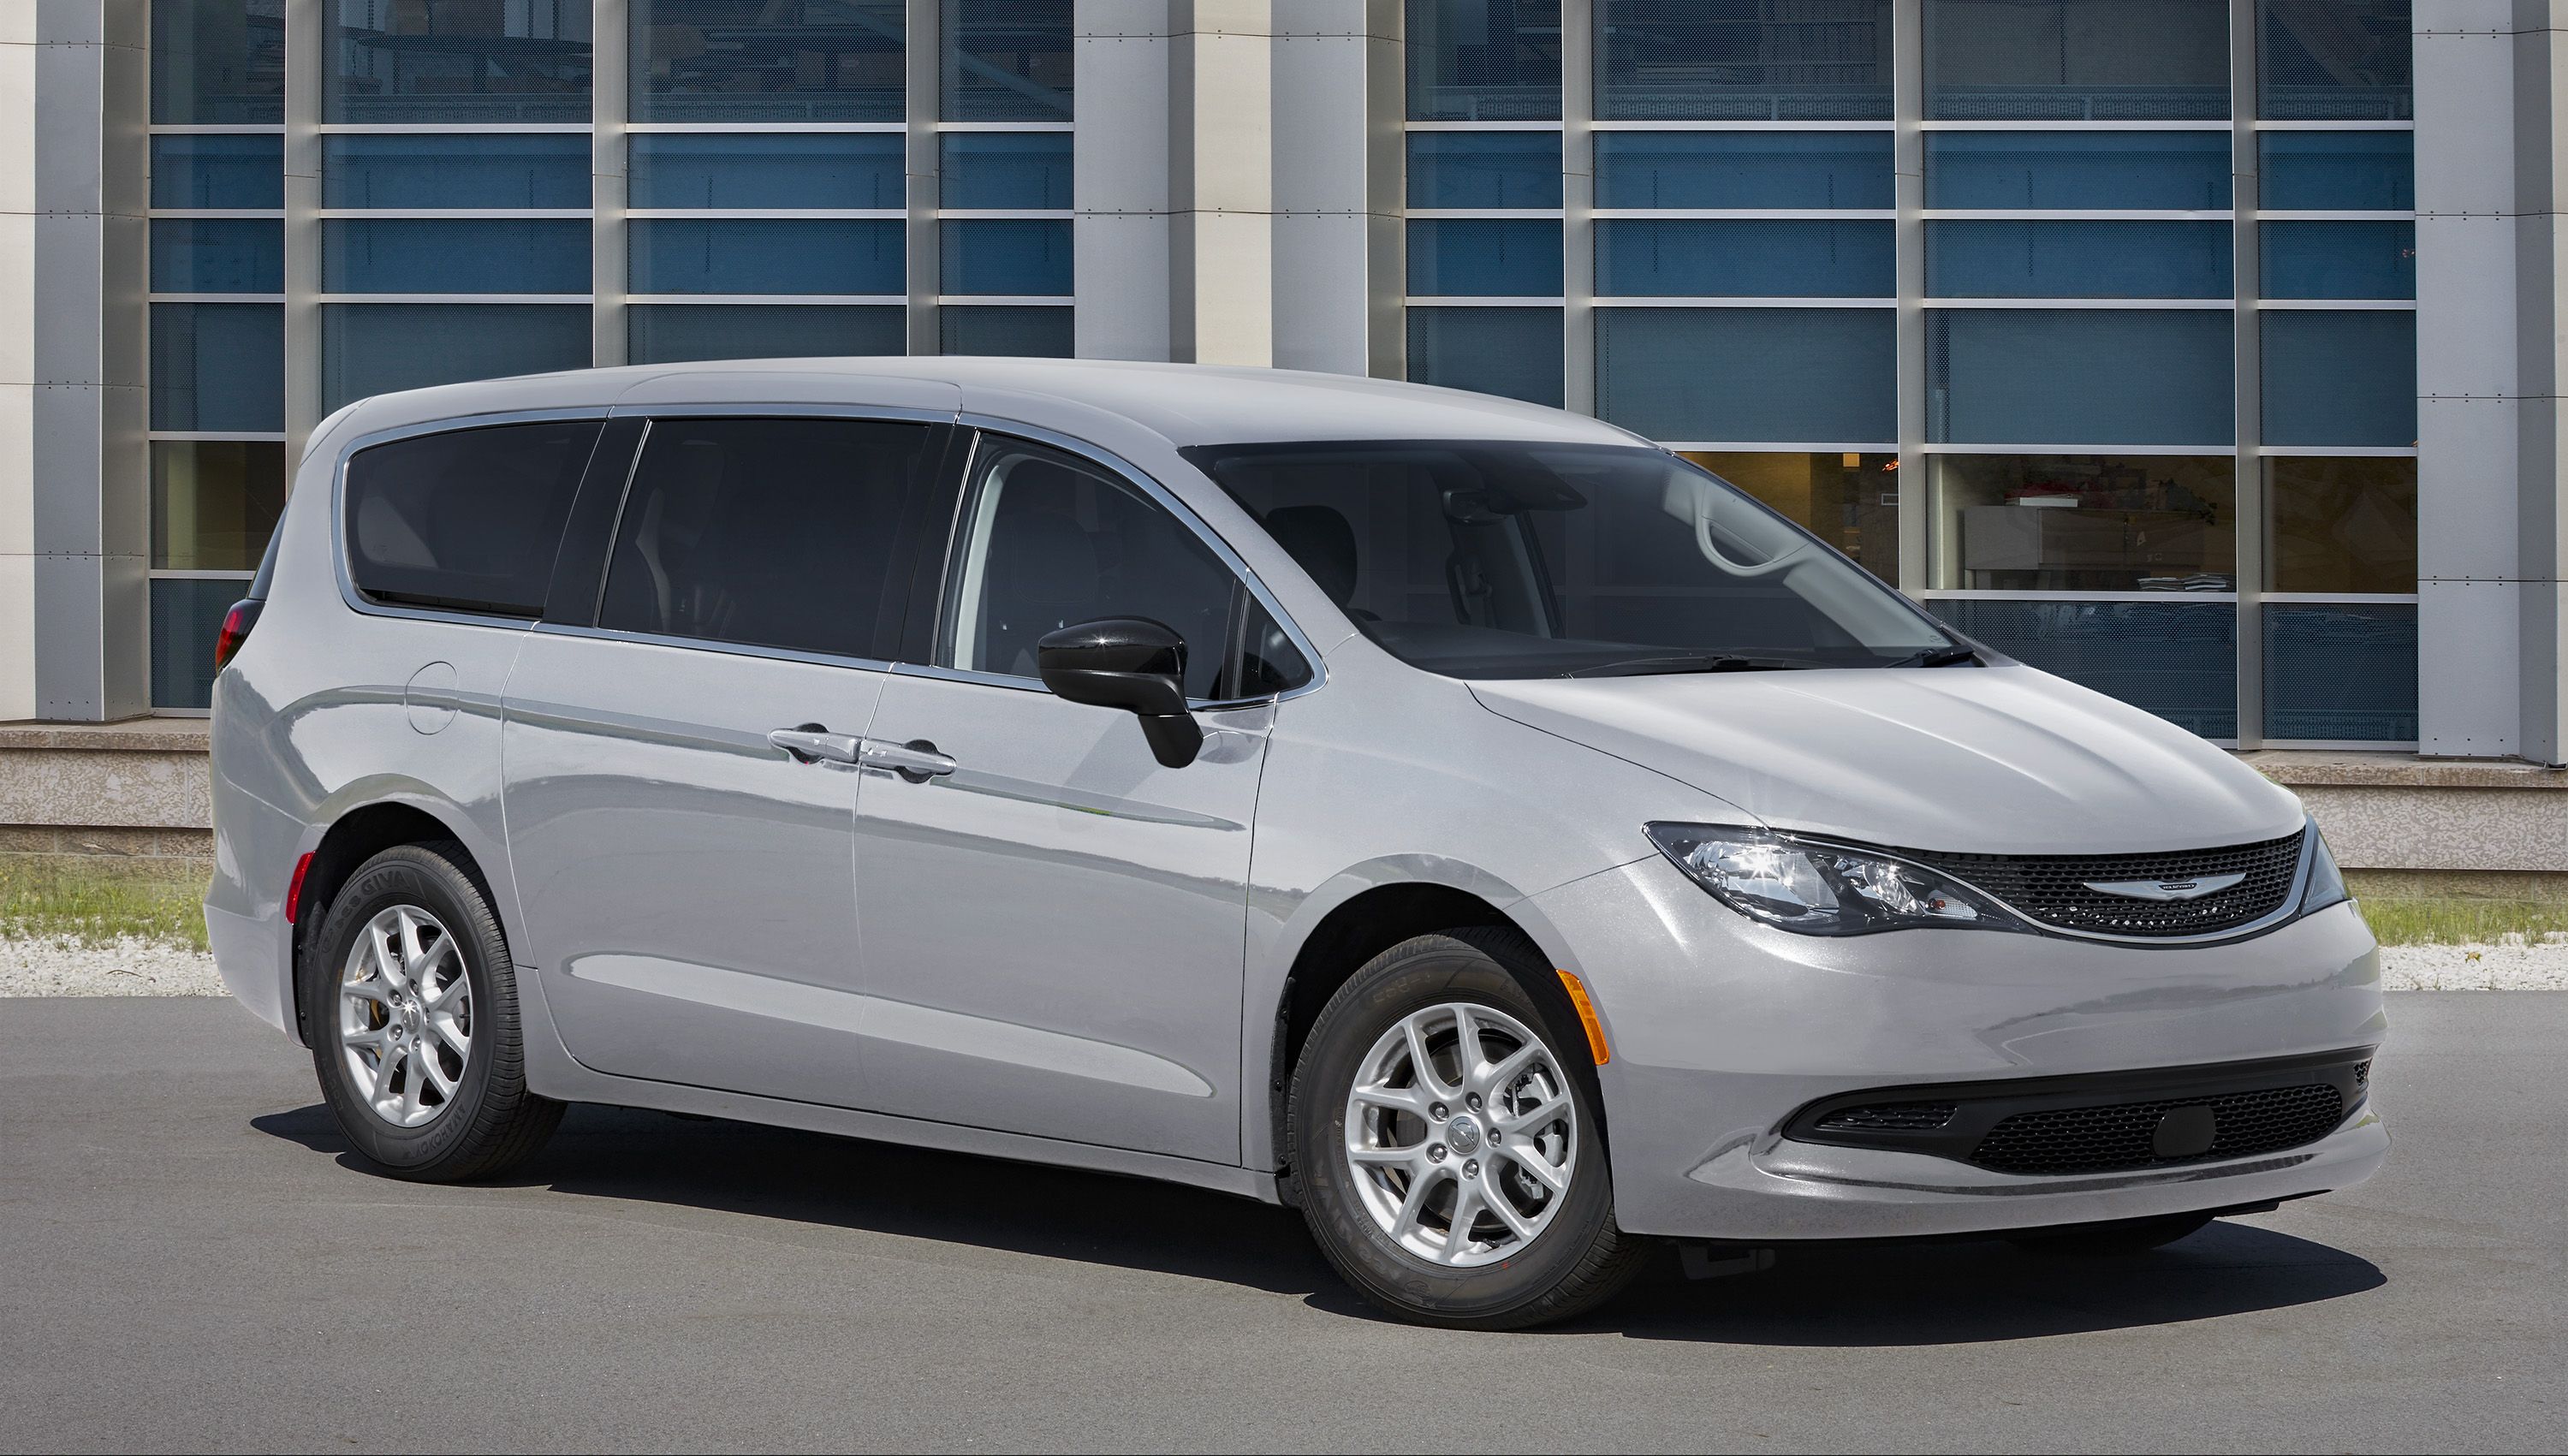 Chrysler Voyager Review, Pricing, and Specs